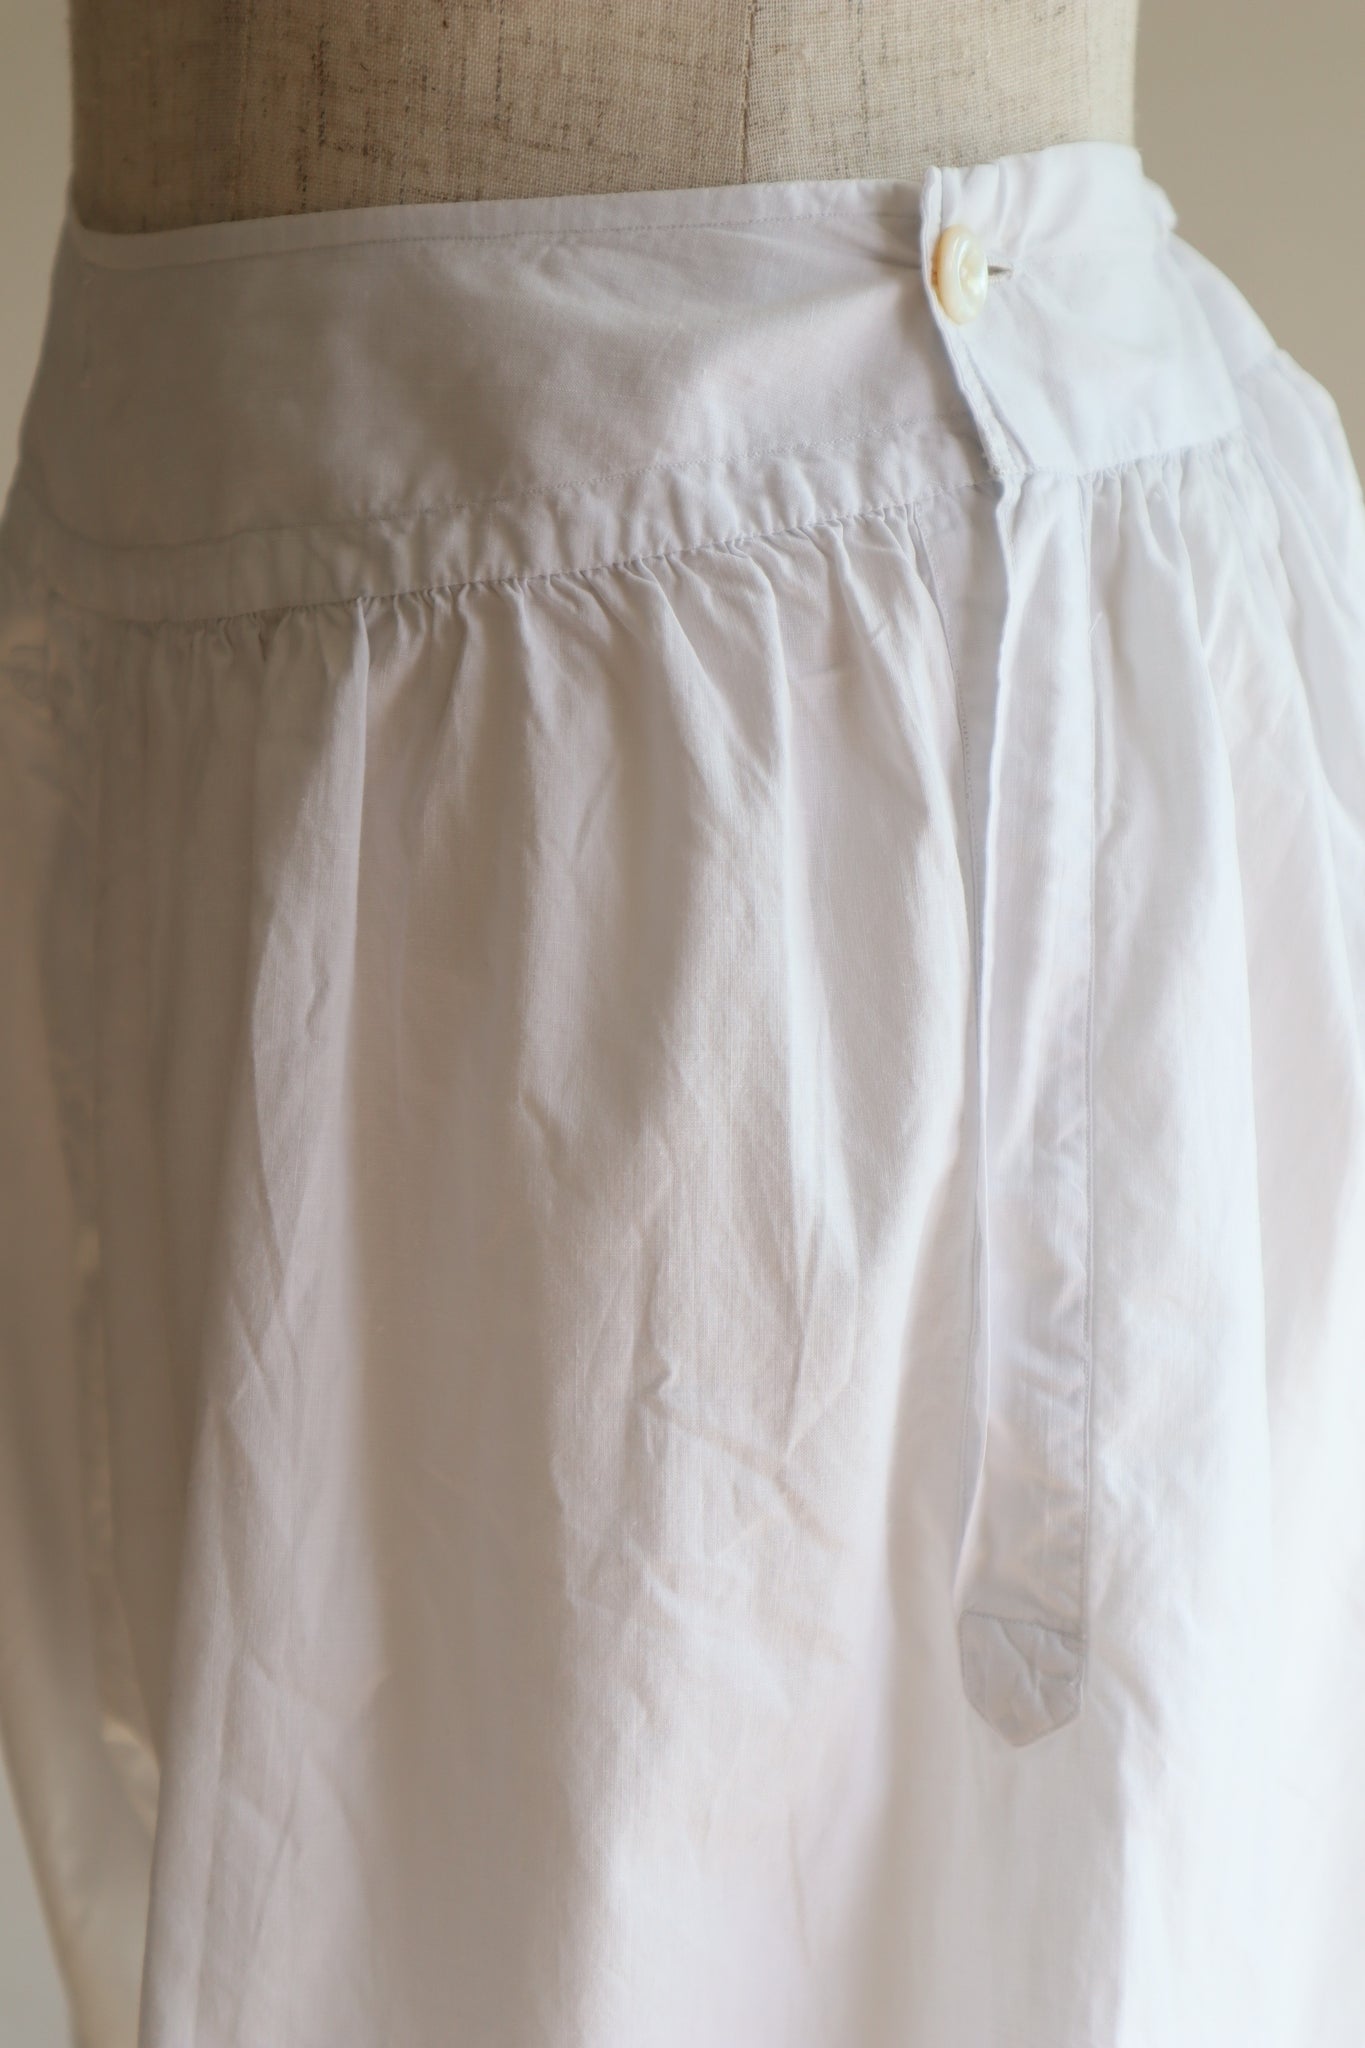 1900s Pin Tucked Cotton Bloomers